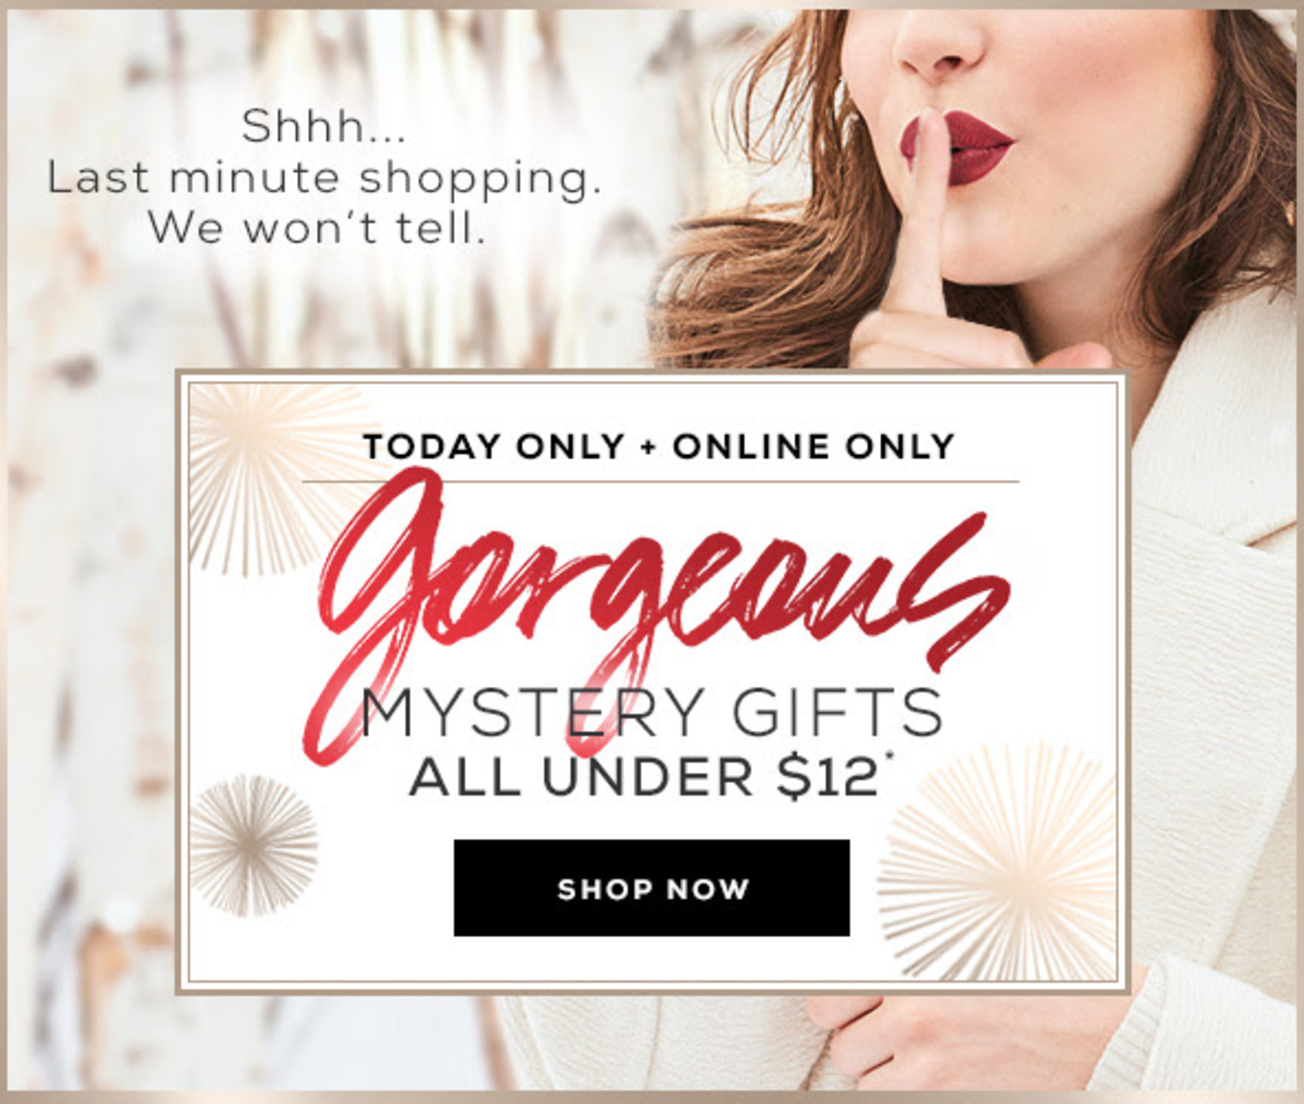 Today Only – Bare Minerals Mystery Boxes Under $12!